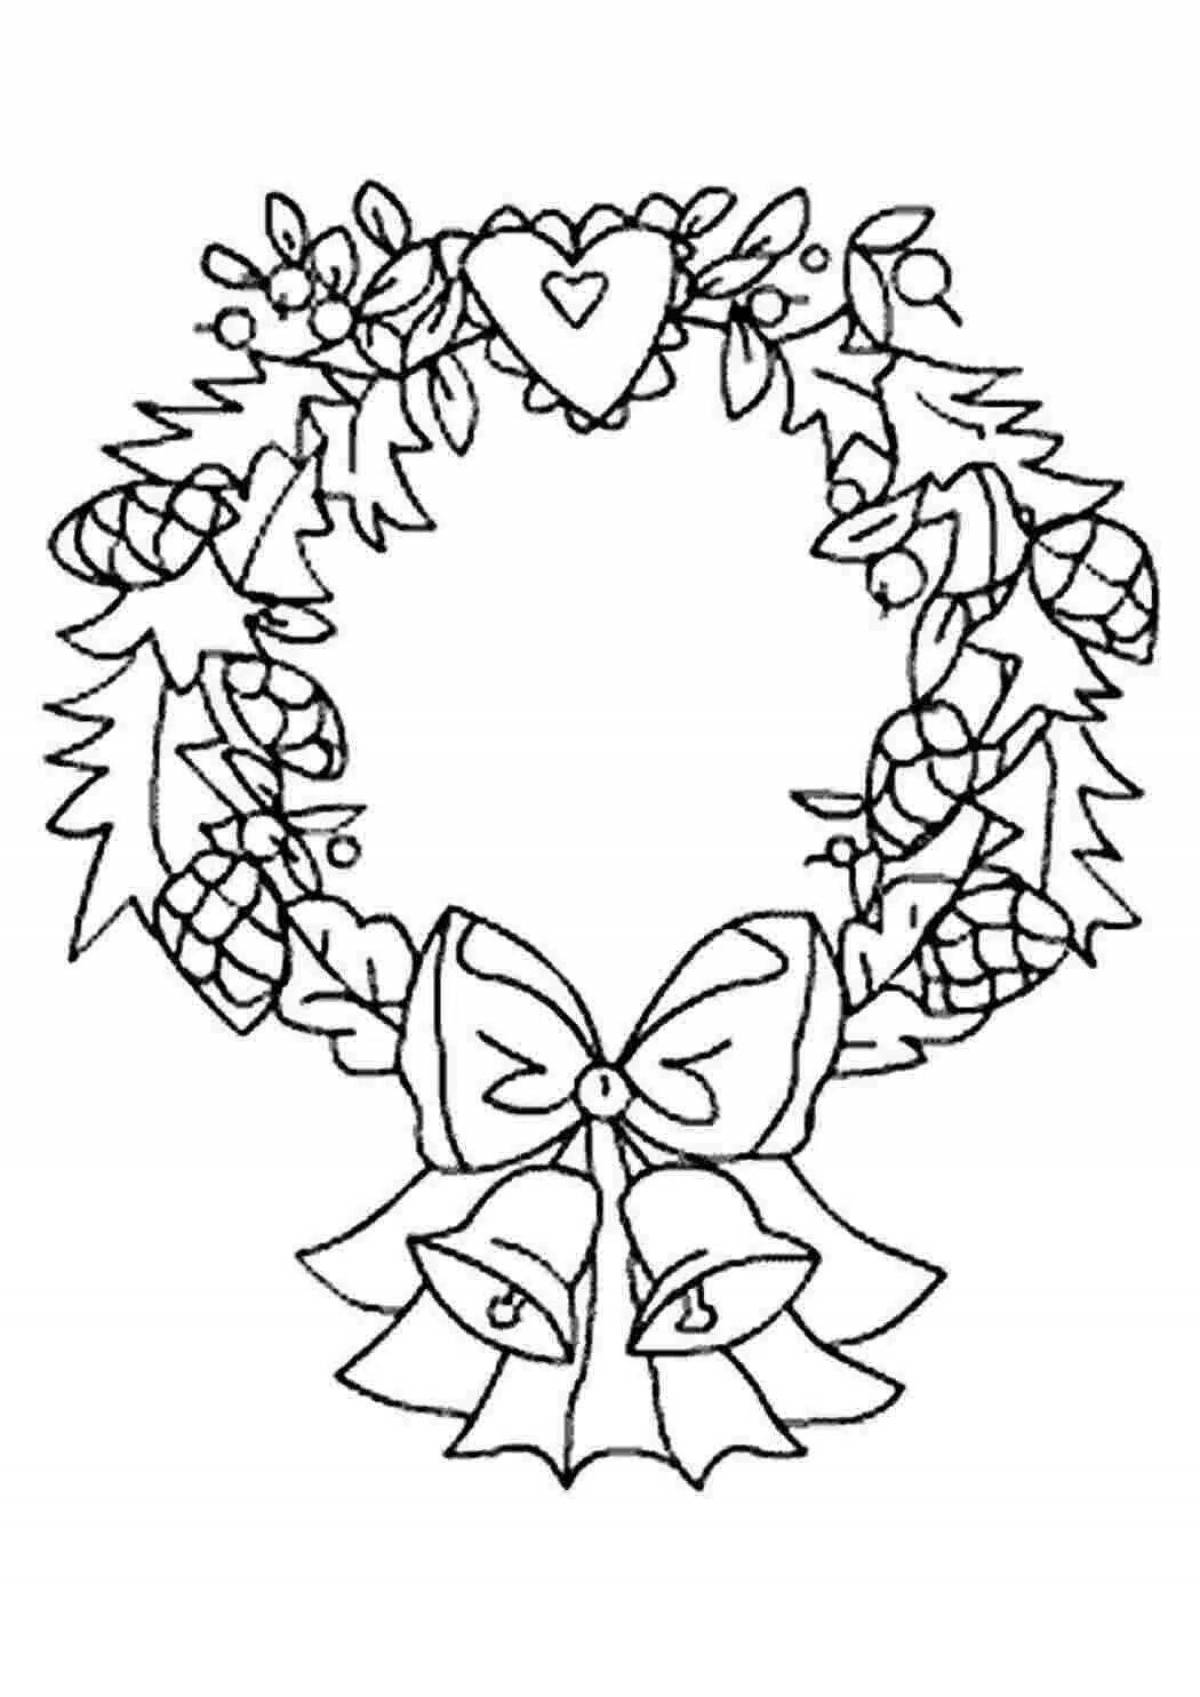 Children's shining Christmas wreath coloring book